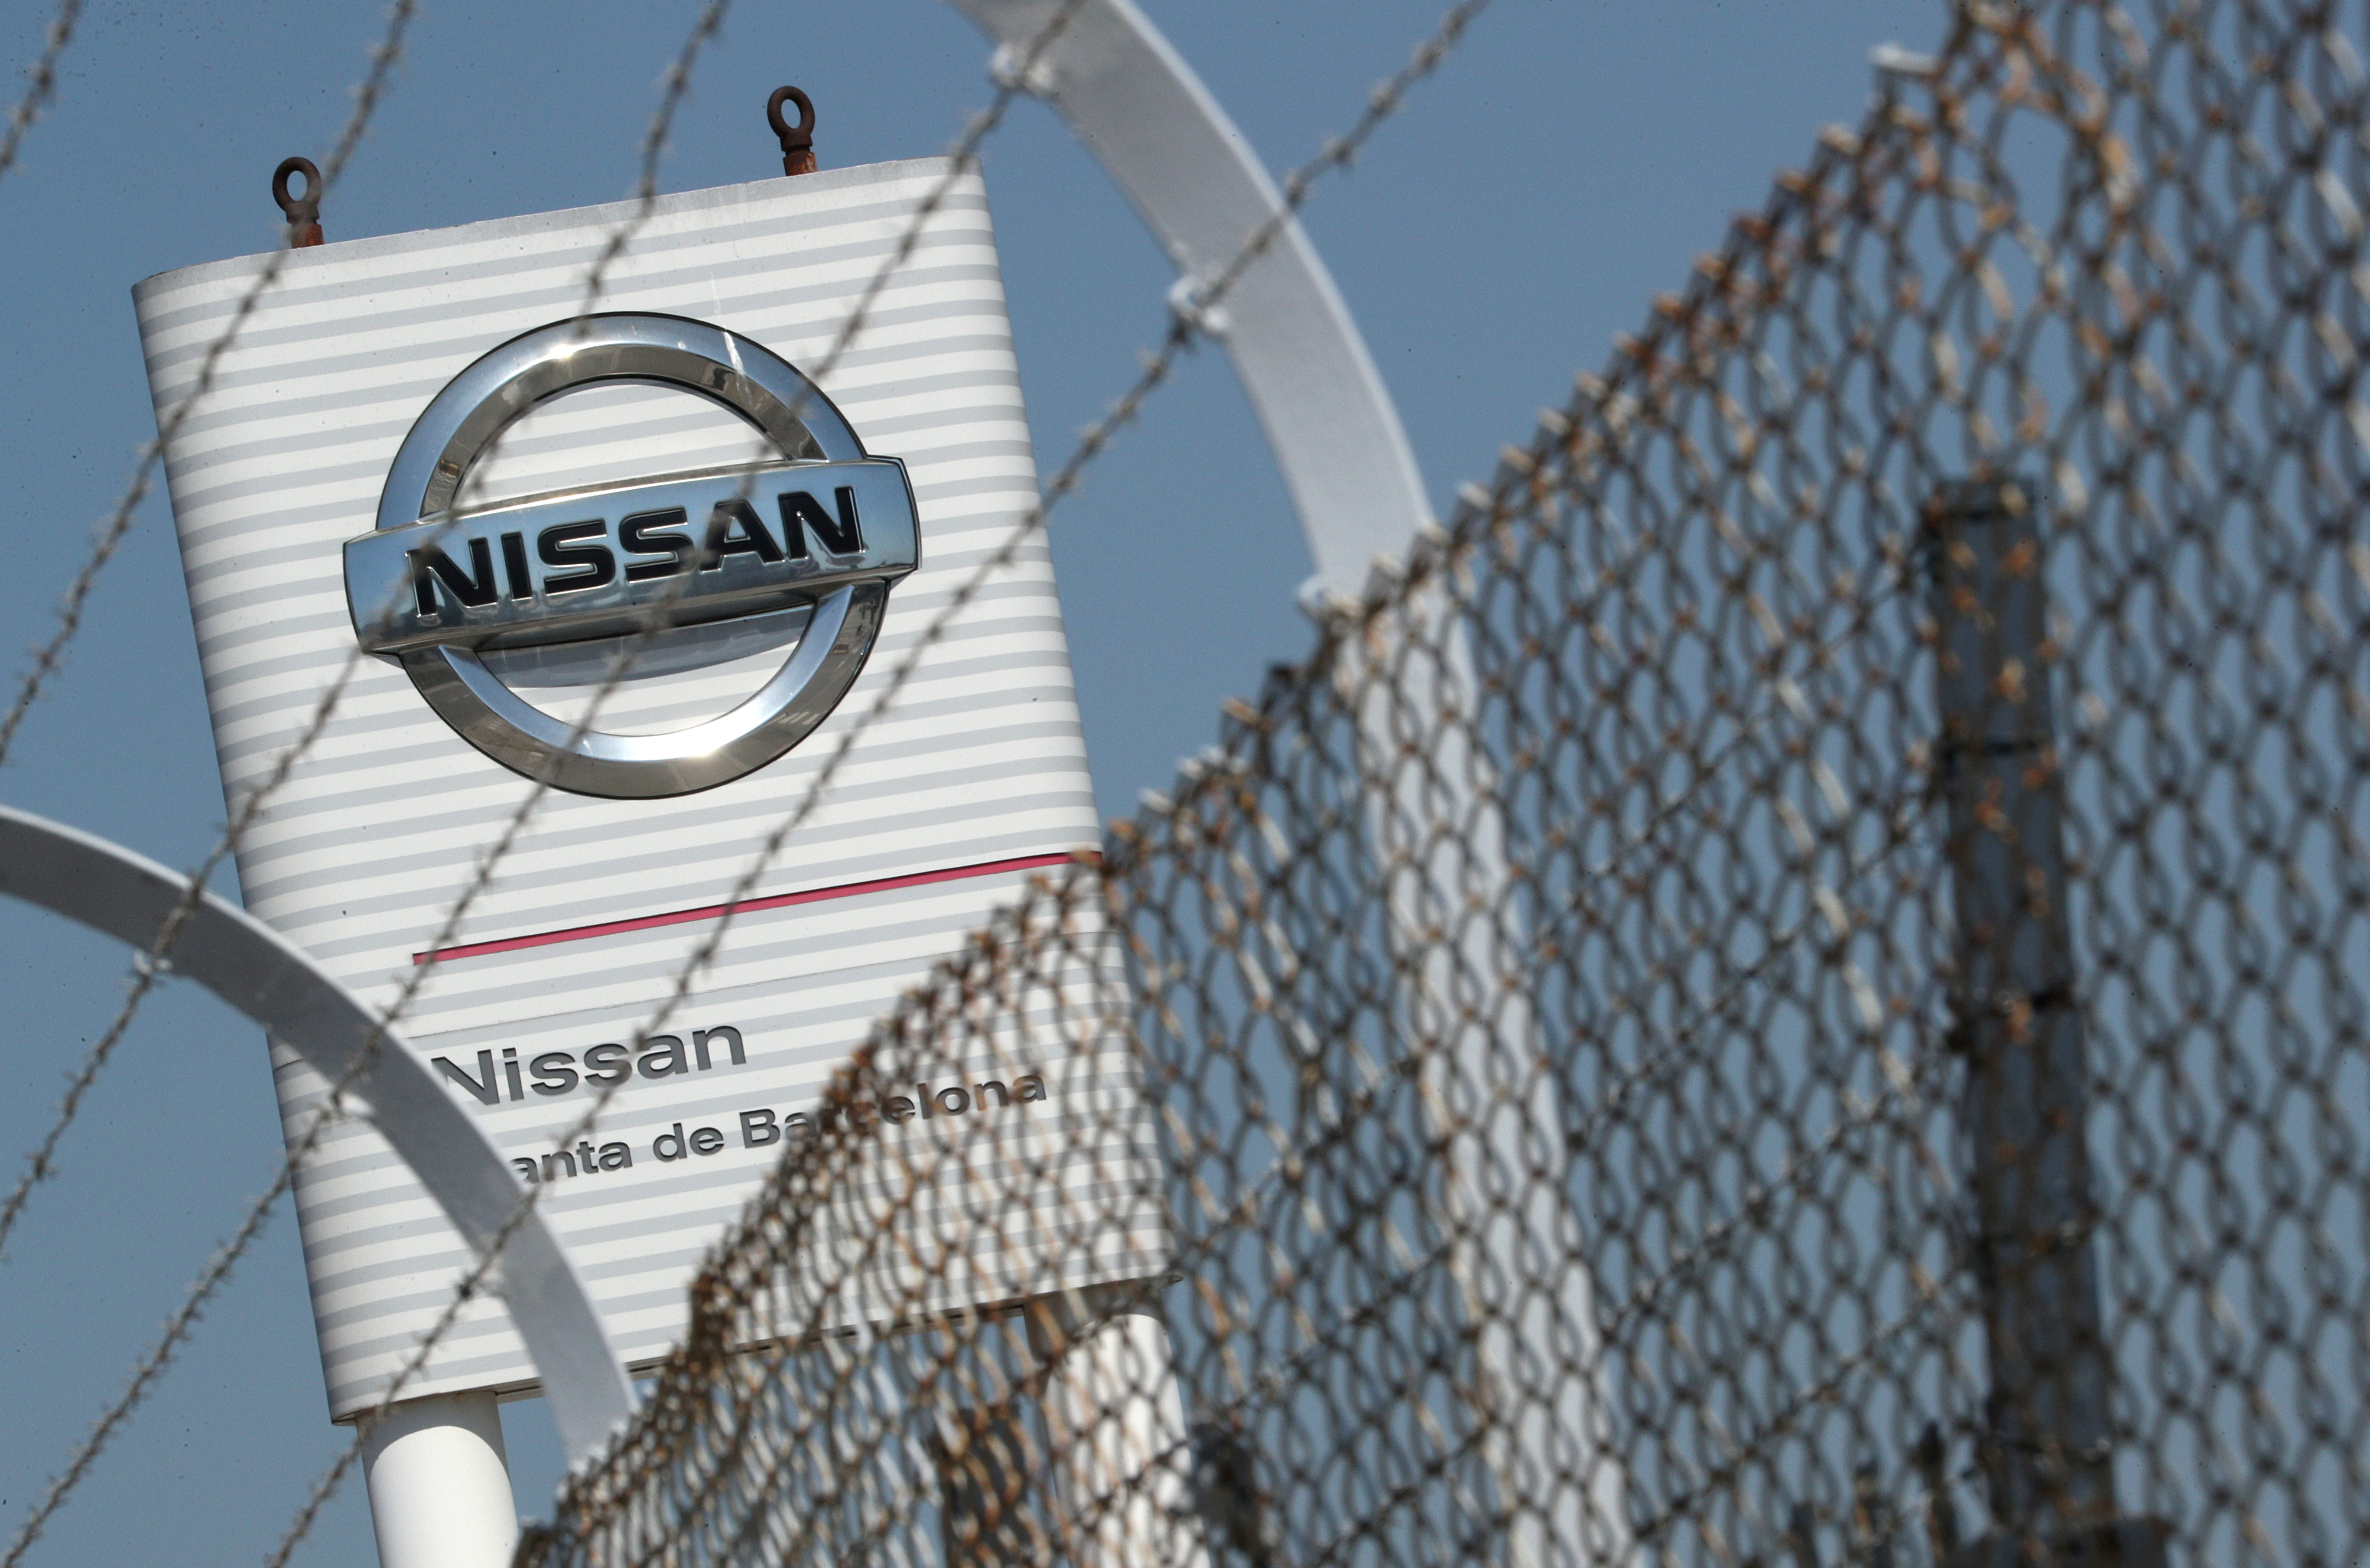 The logo of Nissan is seen through a fence at Nissan factory at Zona Franca during the coronavirus disease (COVID-19) outbreak in Barcelona